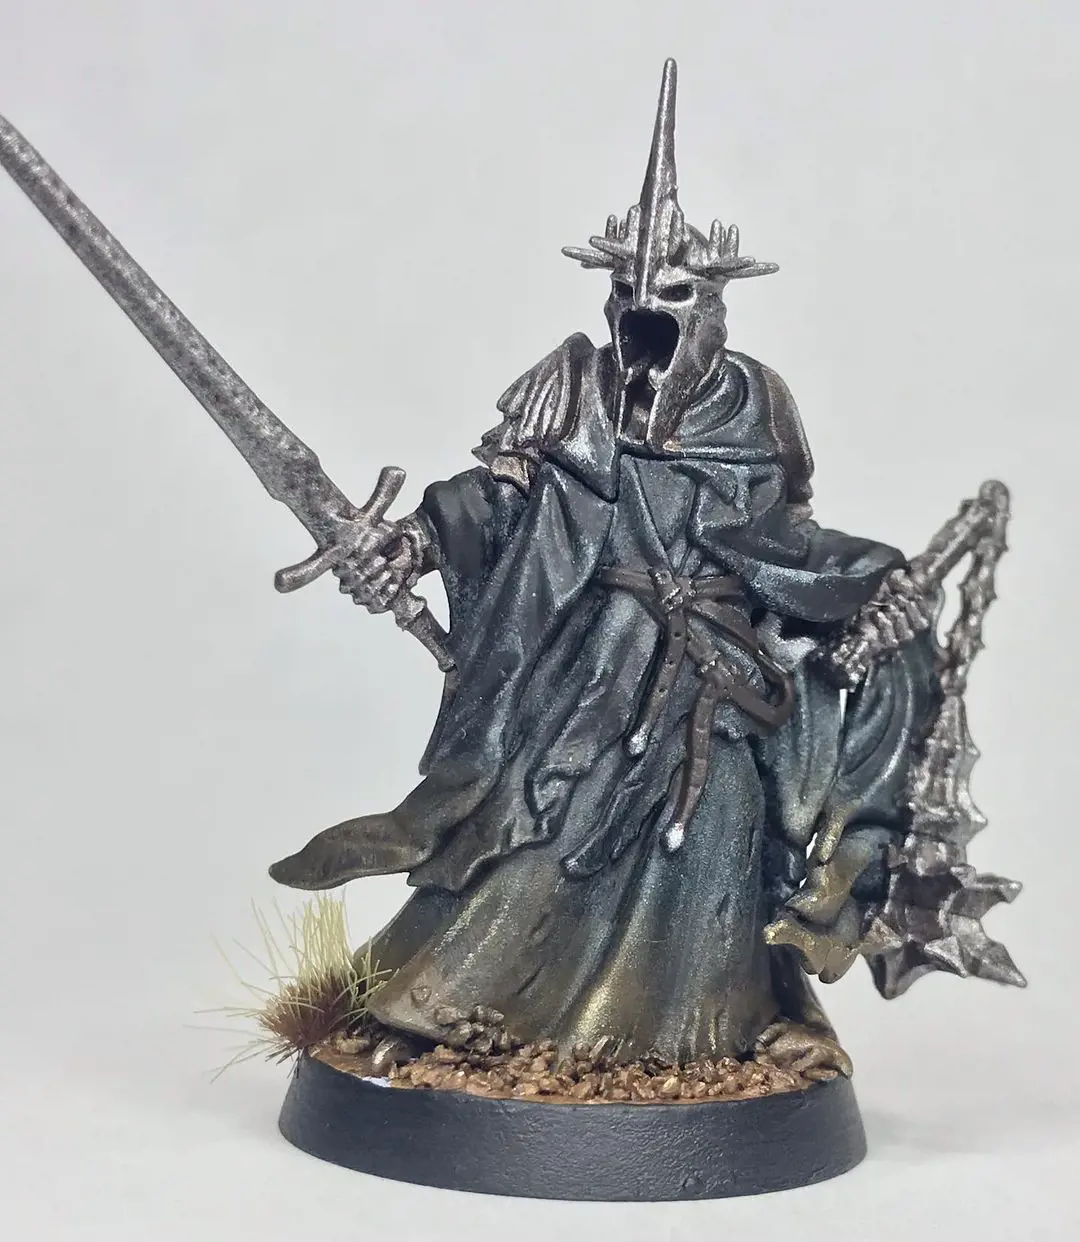 Action figure depicting the Witch-King of Angmar